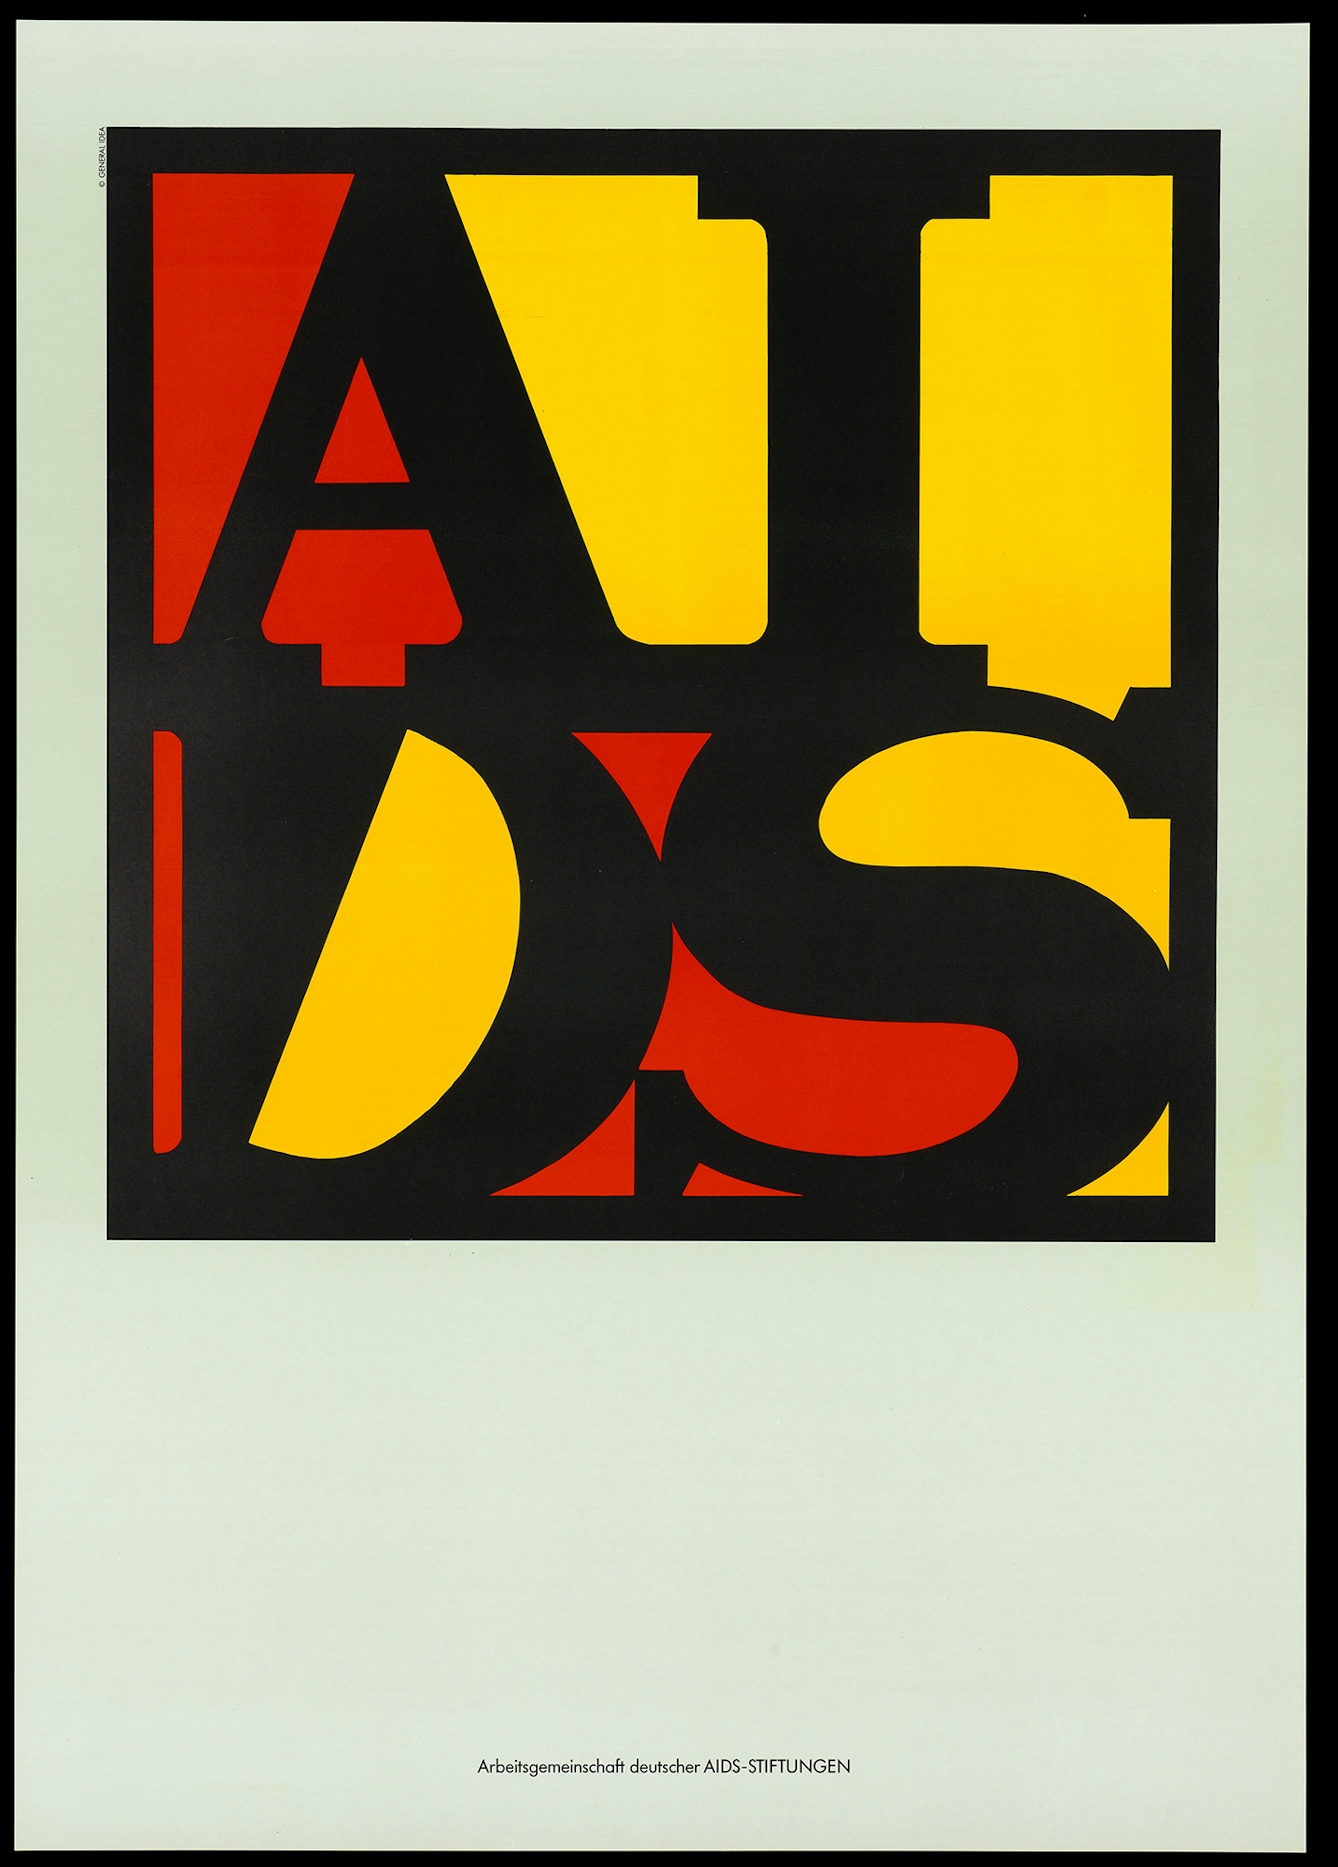 The letters A I D S fill a large square in two rows. The background is red and yellow, with black lettering to represent the colours of the German flag.